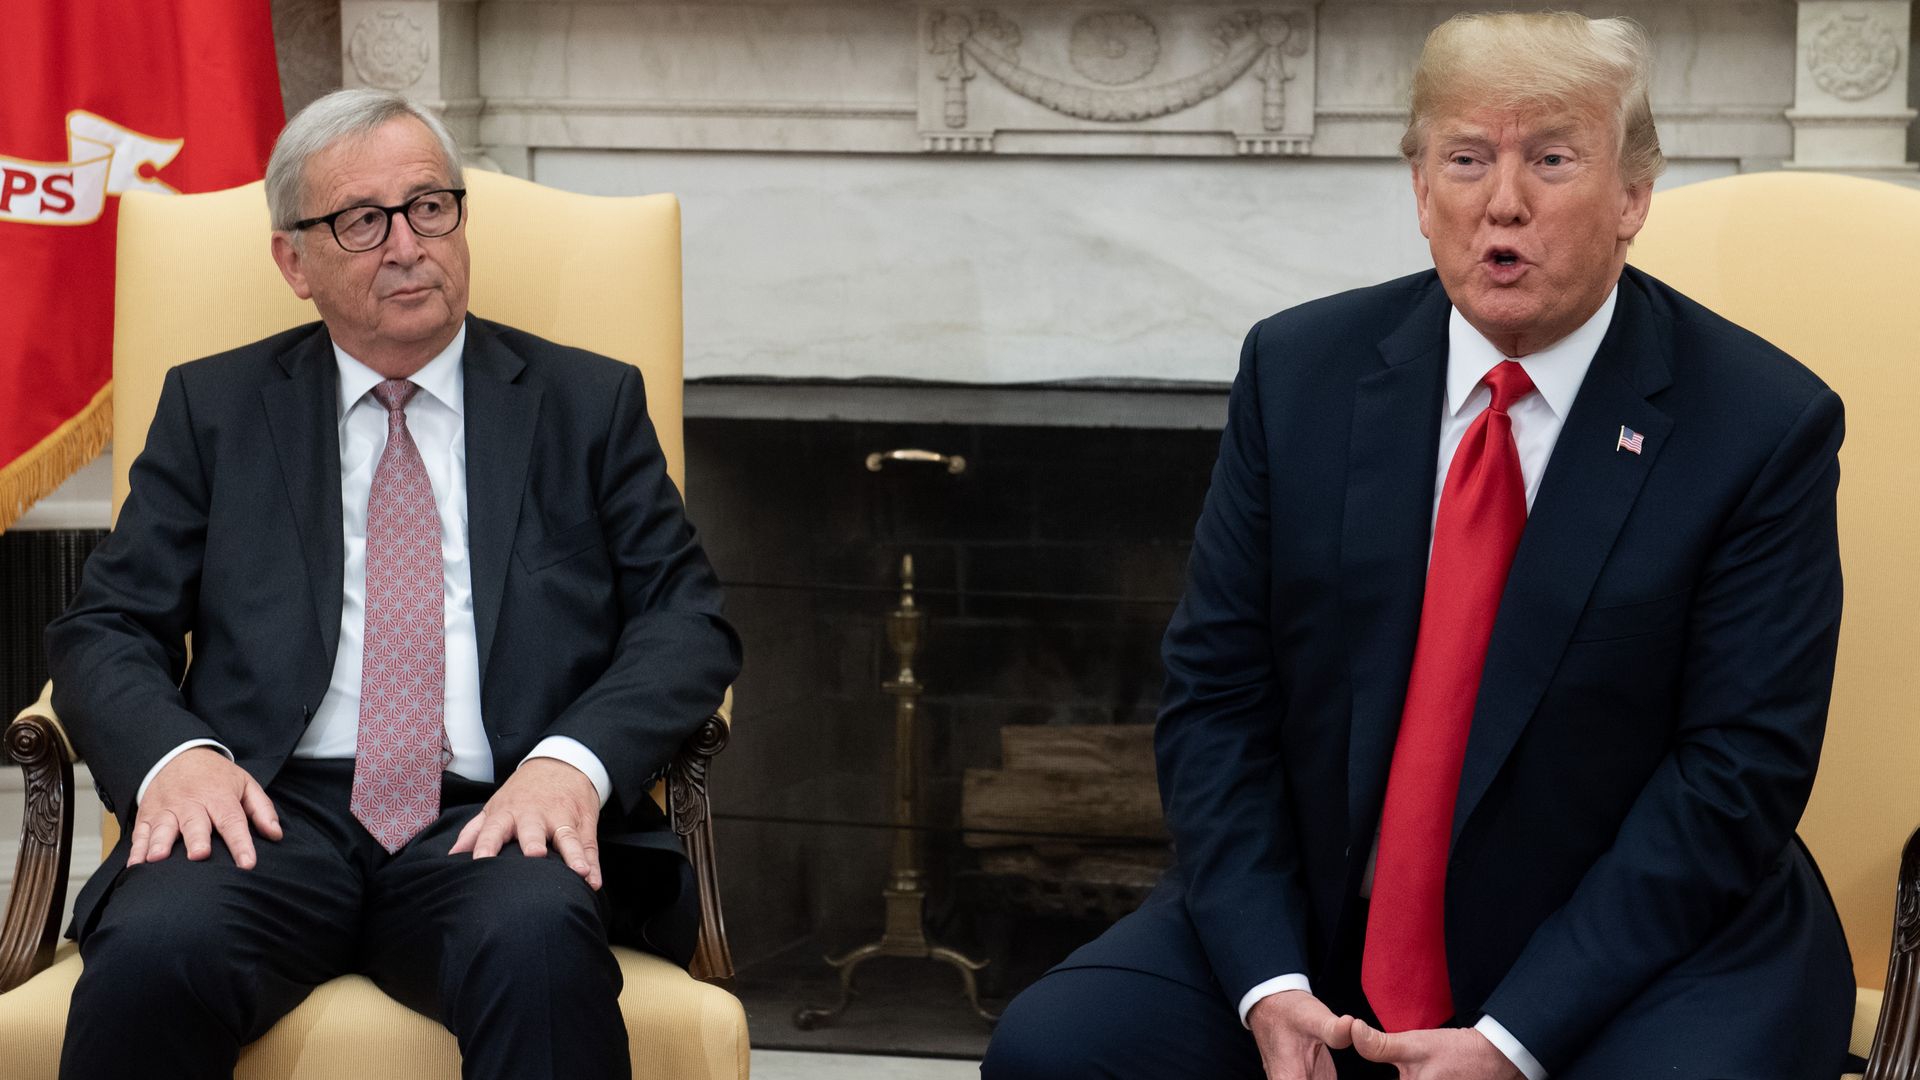 Jean-Claude Juncker and Trump in the Oval Office